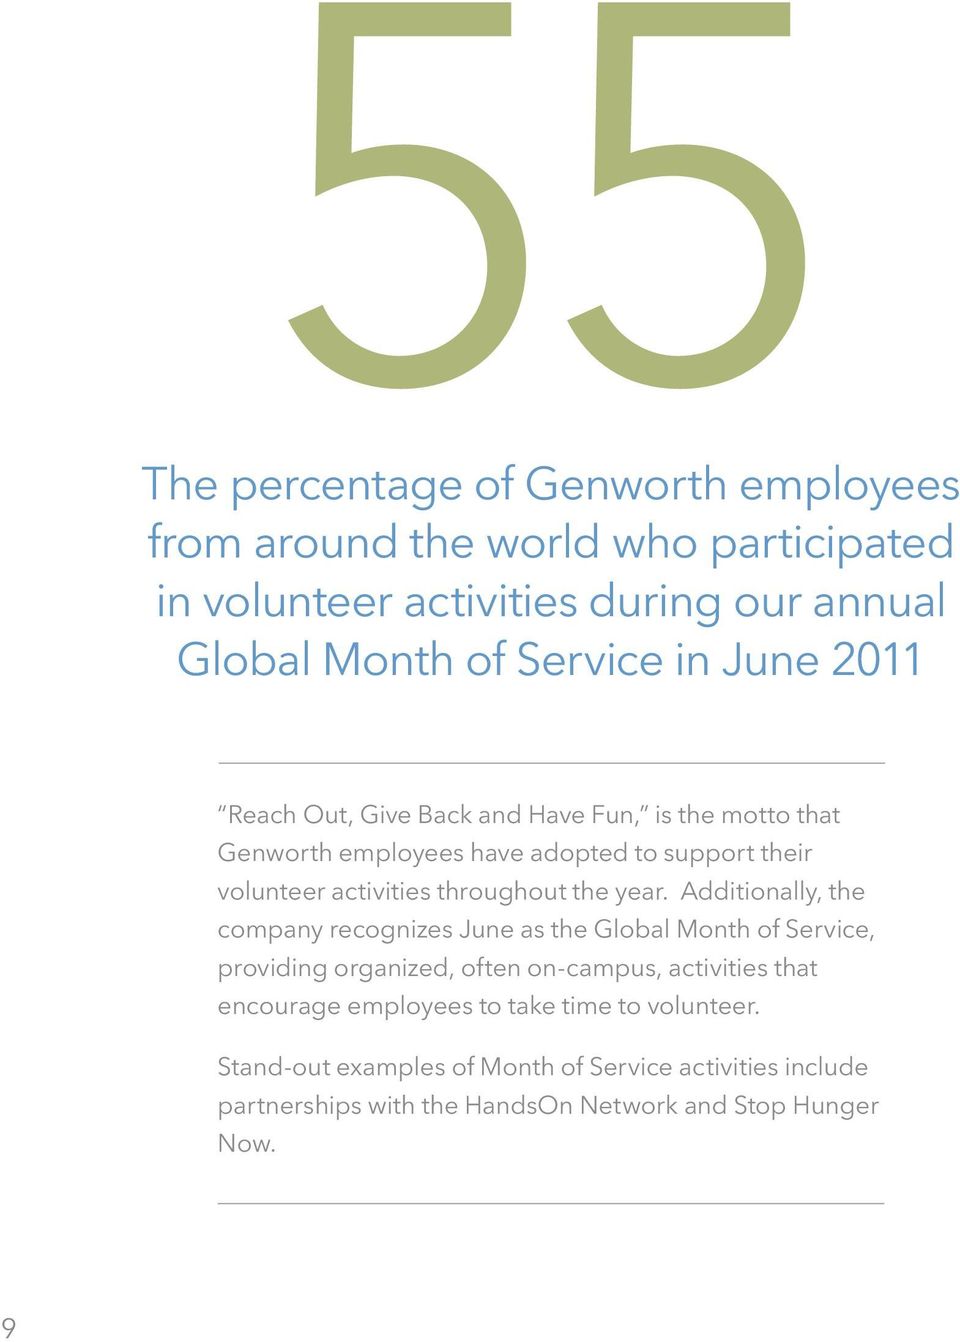 year. Additionally, the company recognizes June as the Global Month of Service, providing organized, often on-campus, activities that encourage